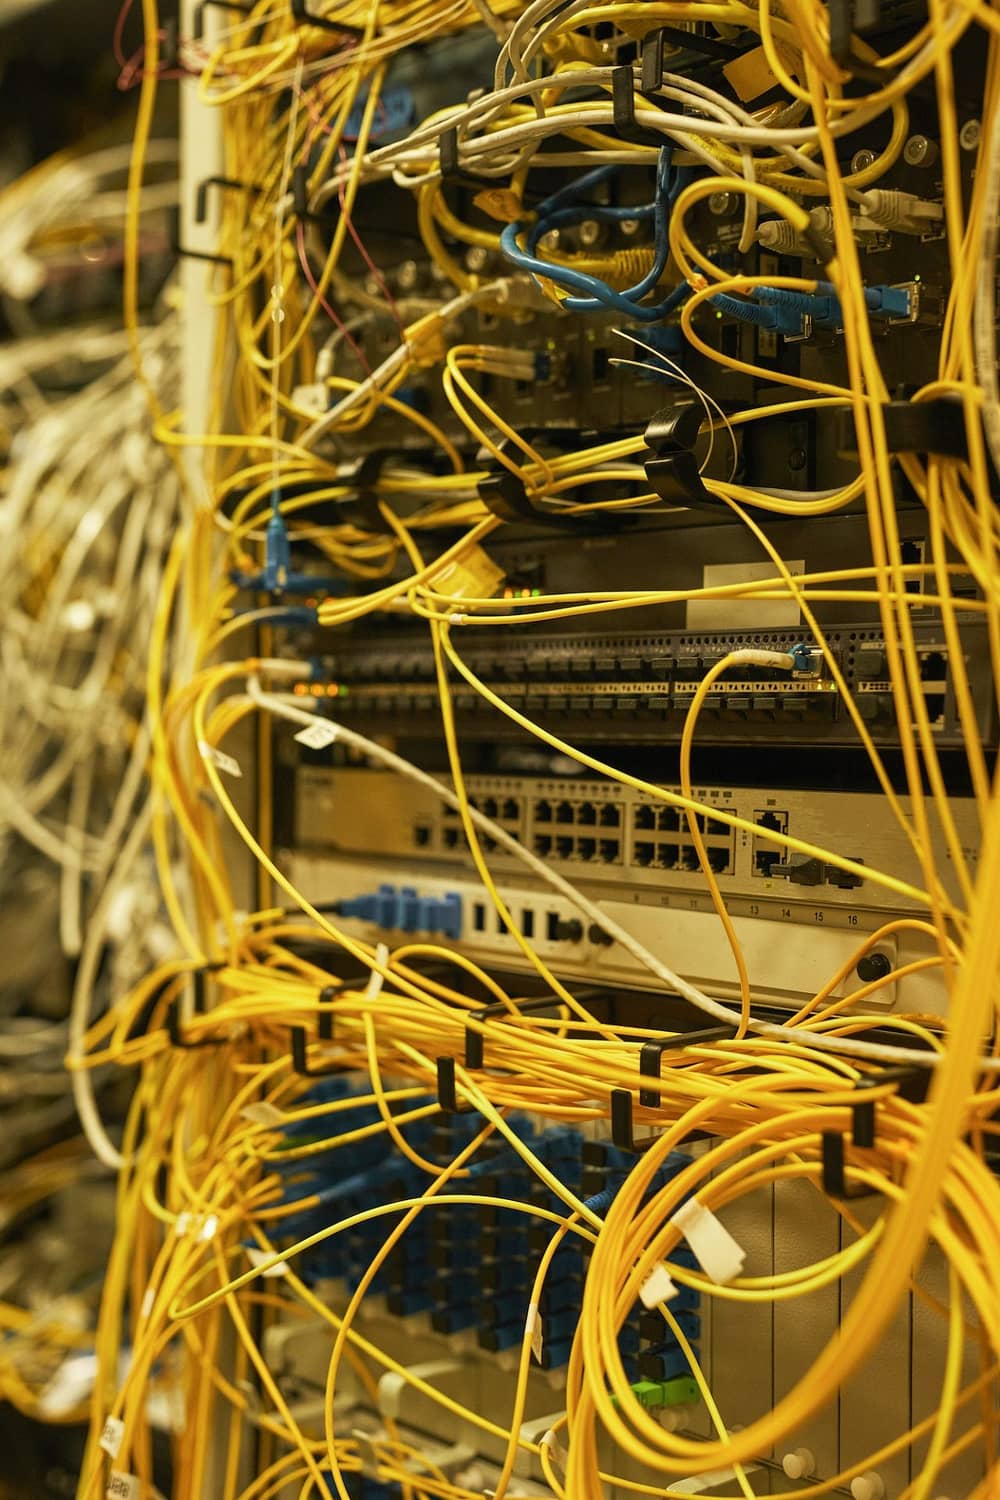 Cables in Server Room